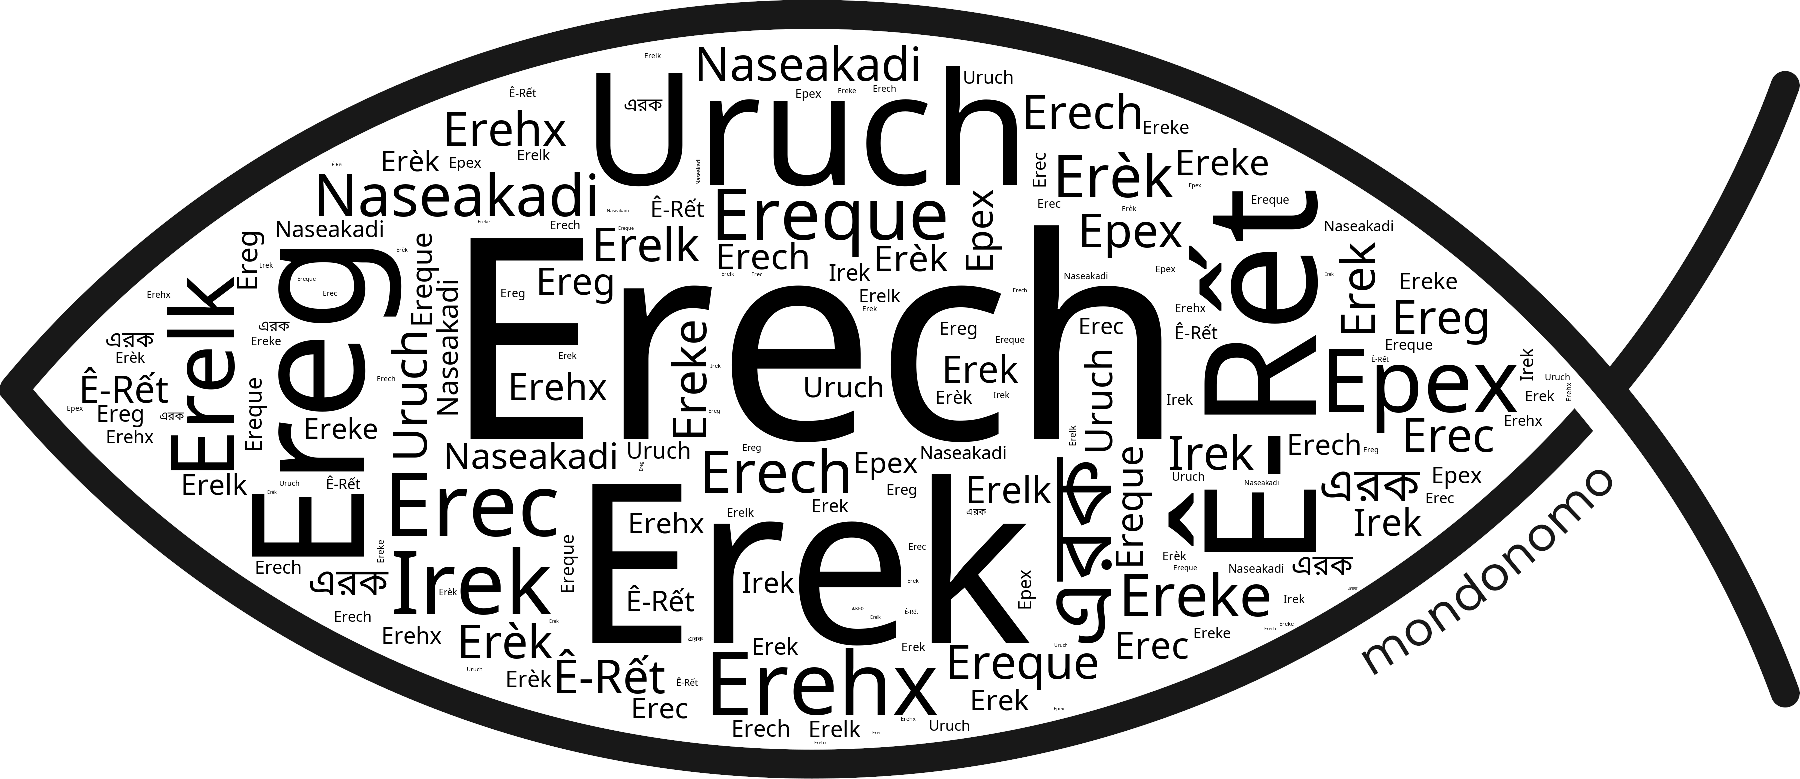 Name Erech in the world's Bibles